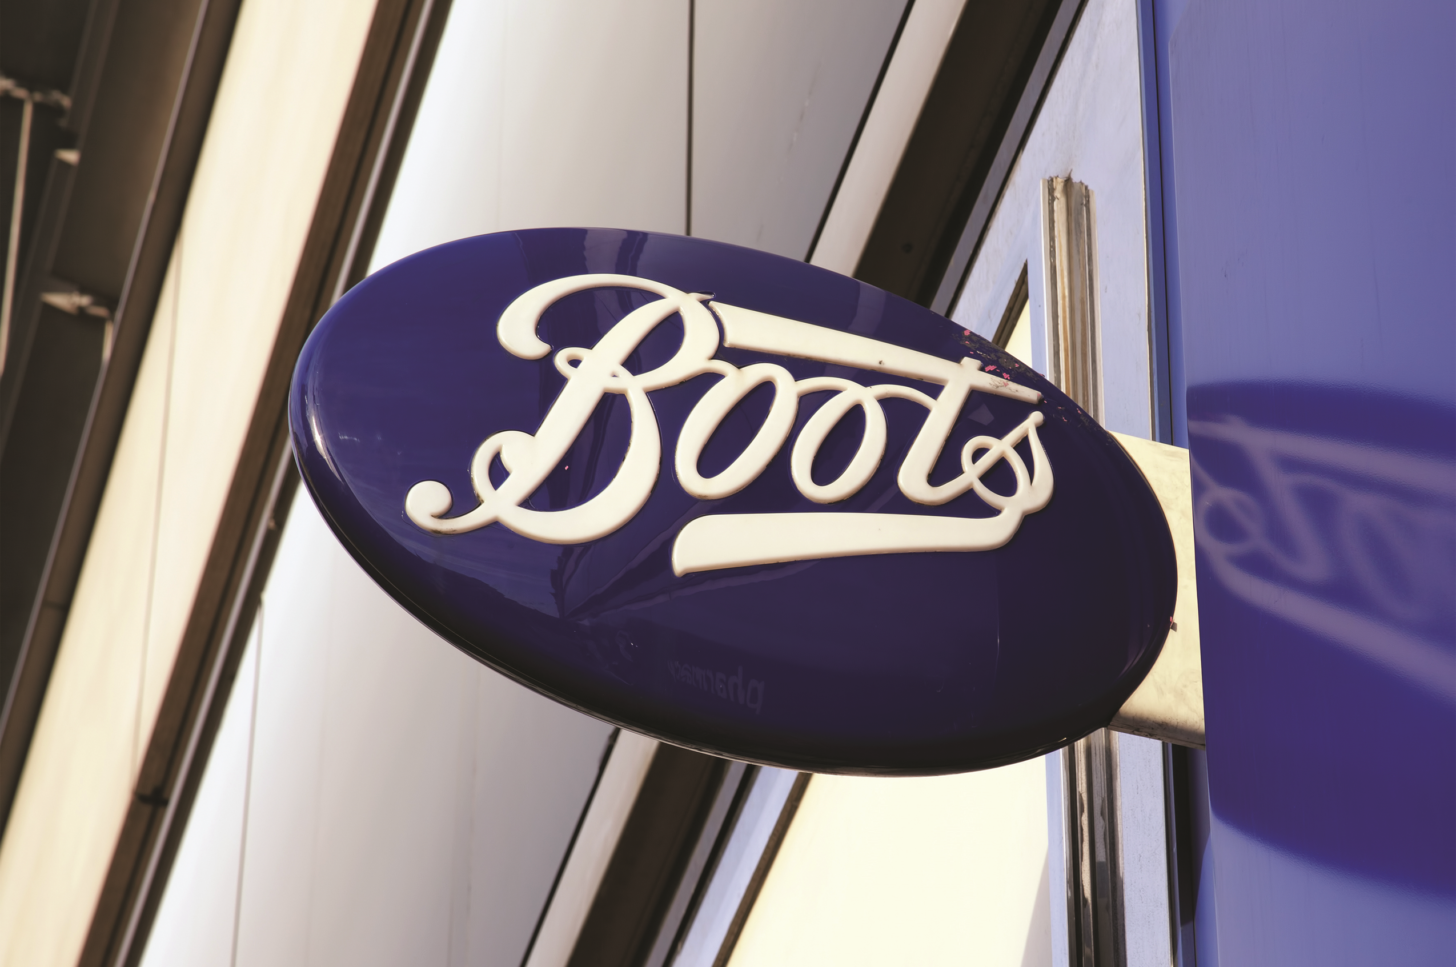 Boots to close 200 stores The Pharmaceutical Journal